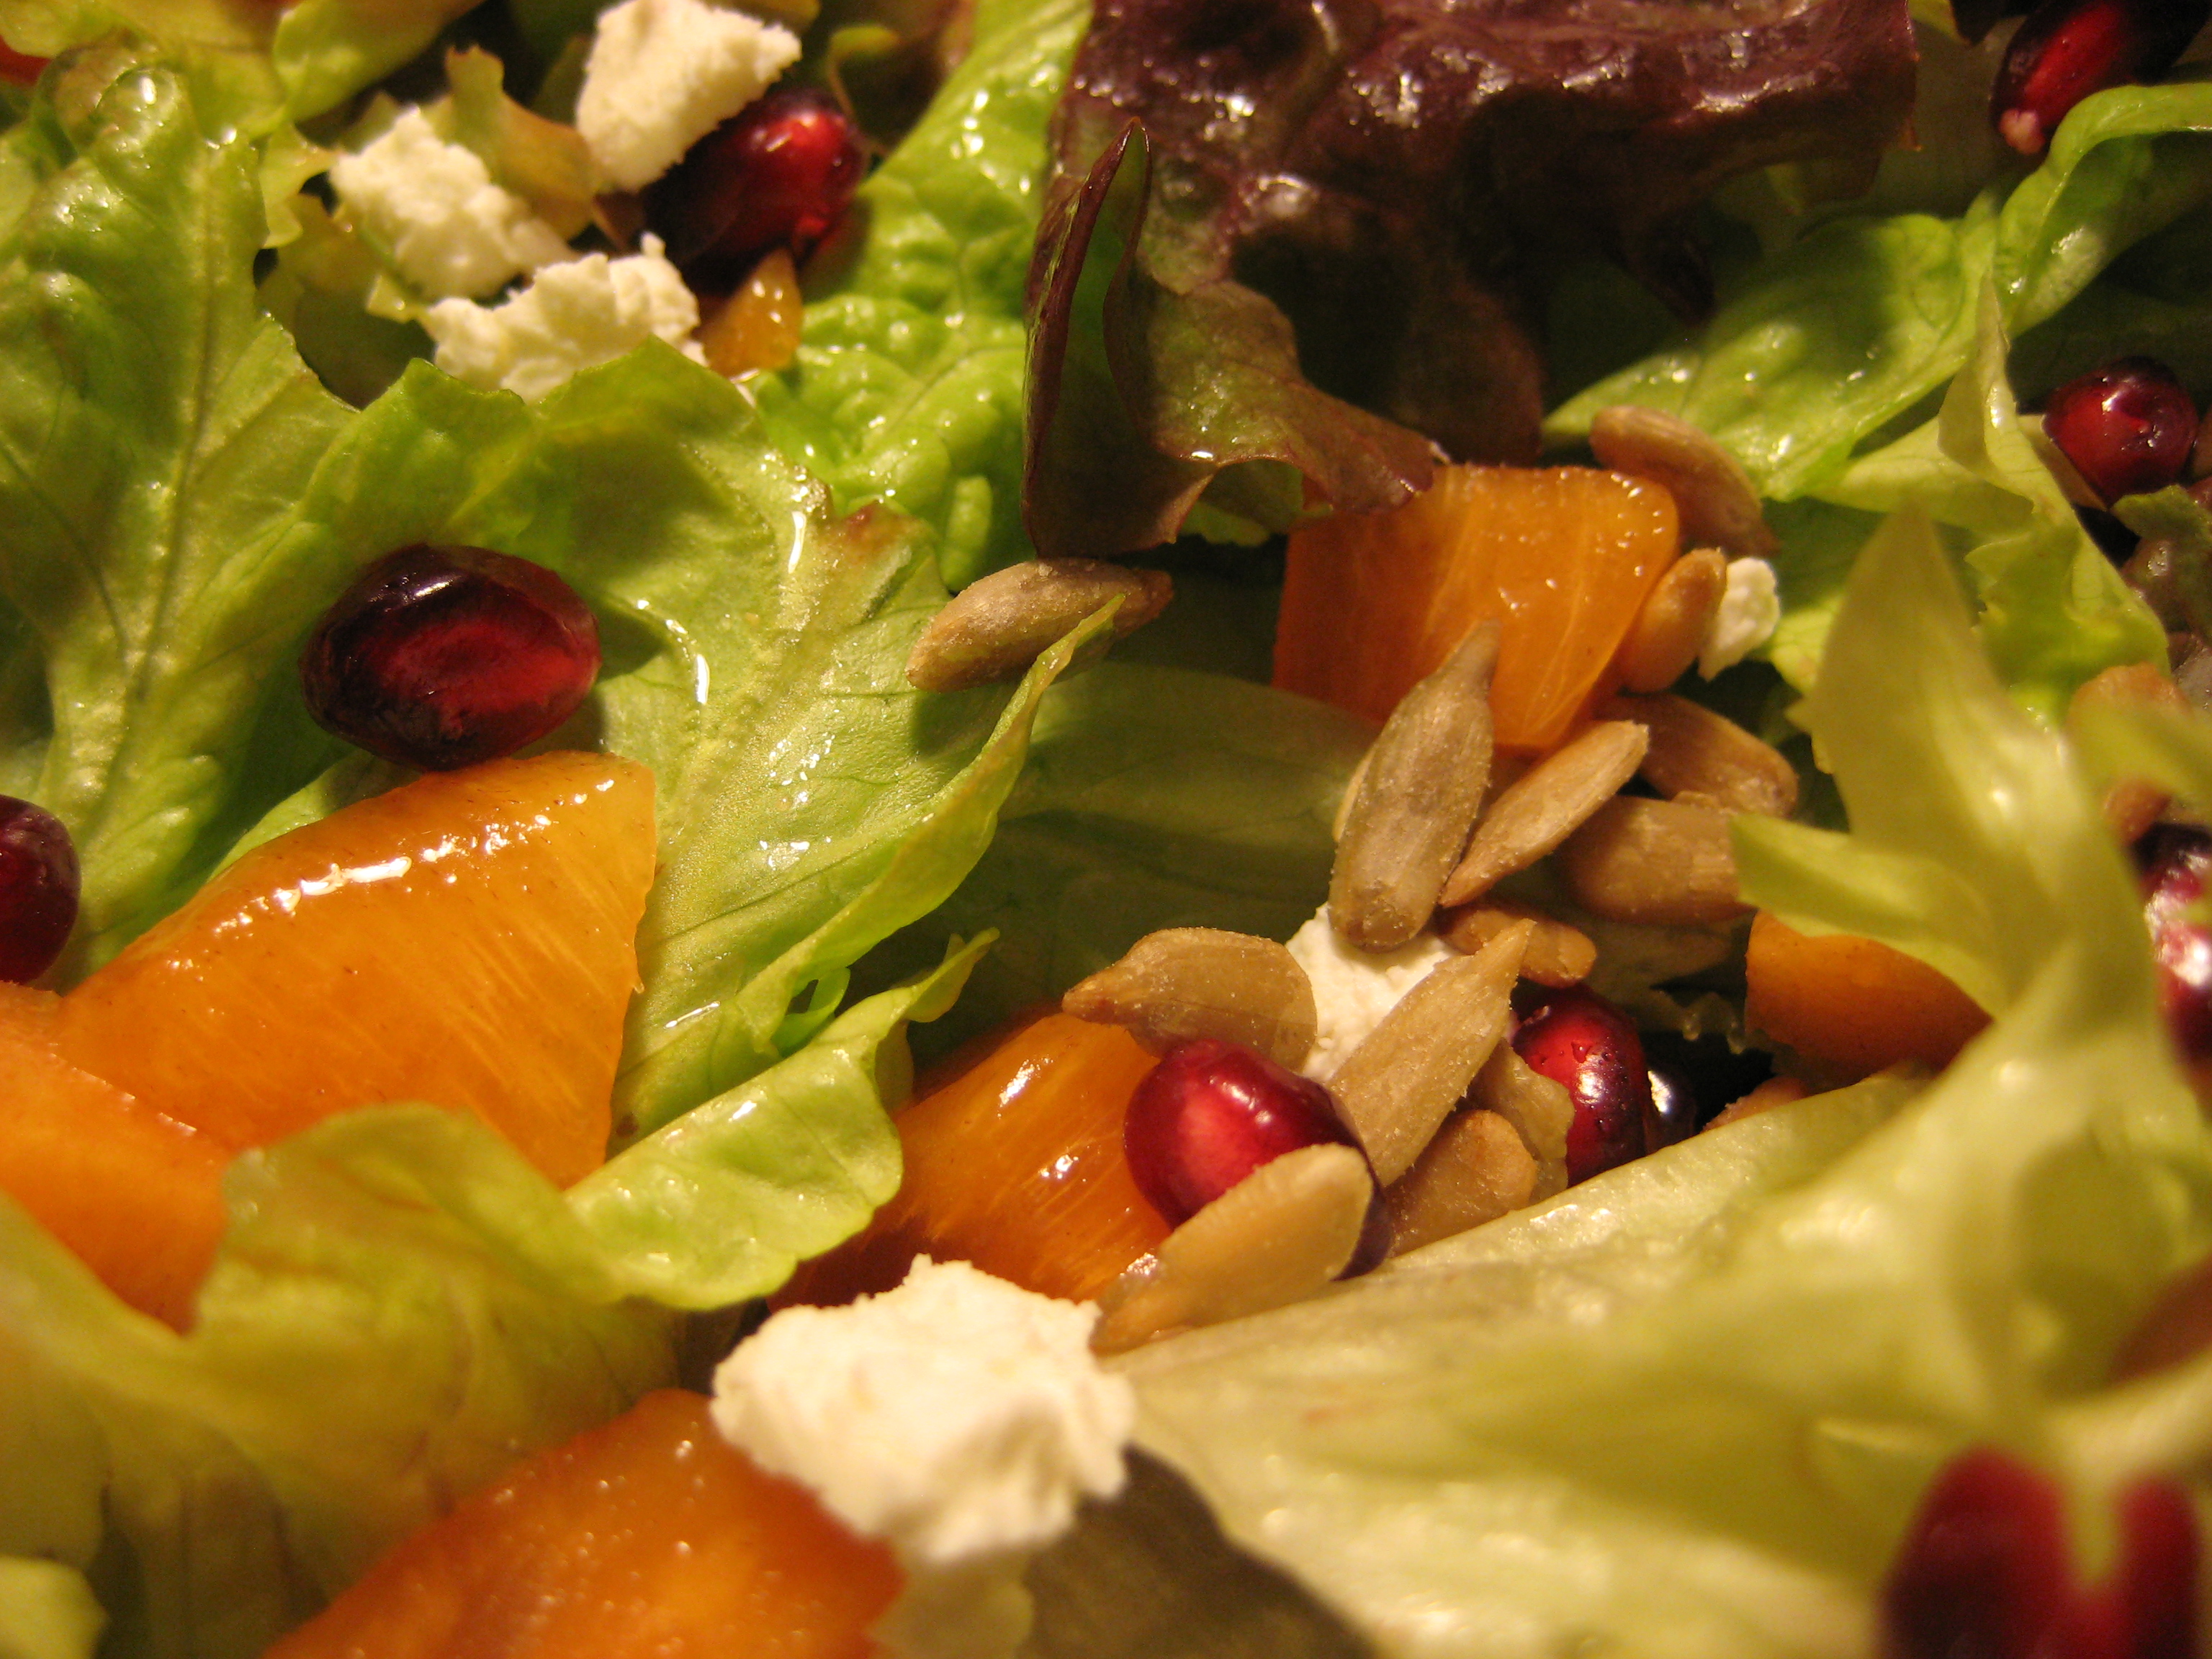 Winter Salad with Pomegranate, Persimmon and Sunflower Vinaigrette